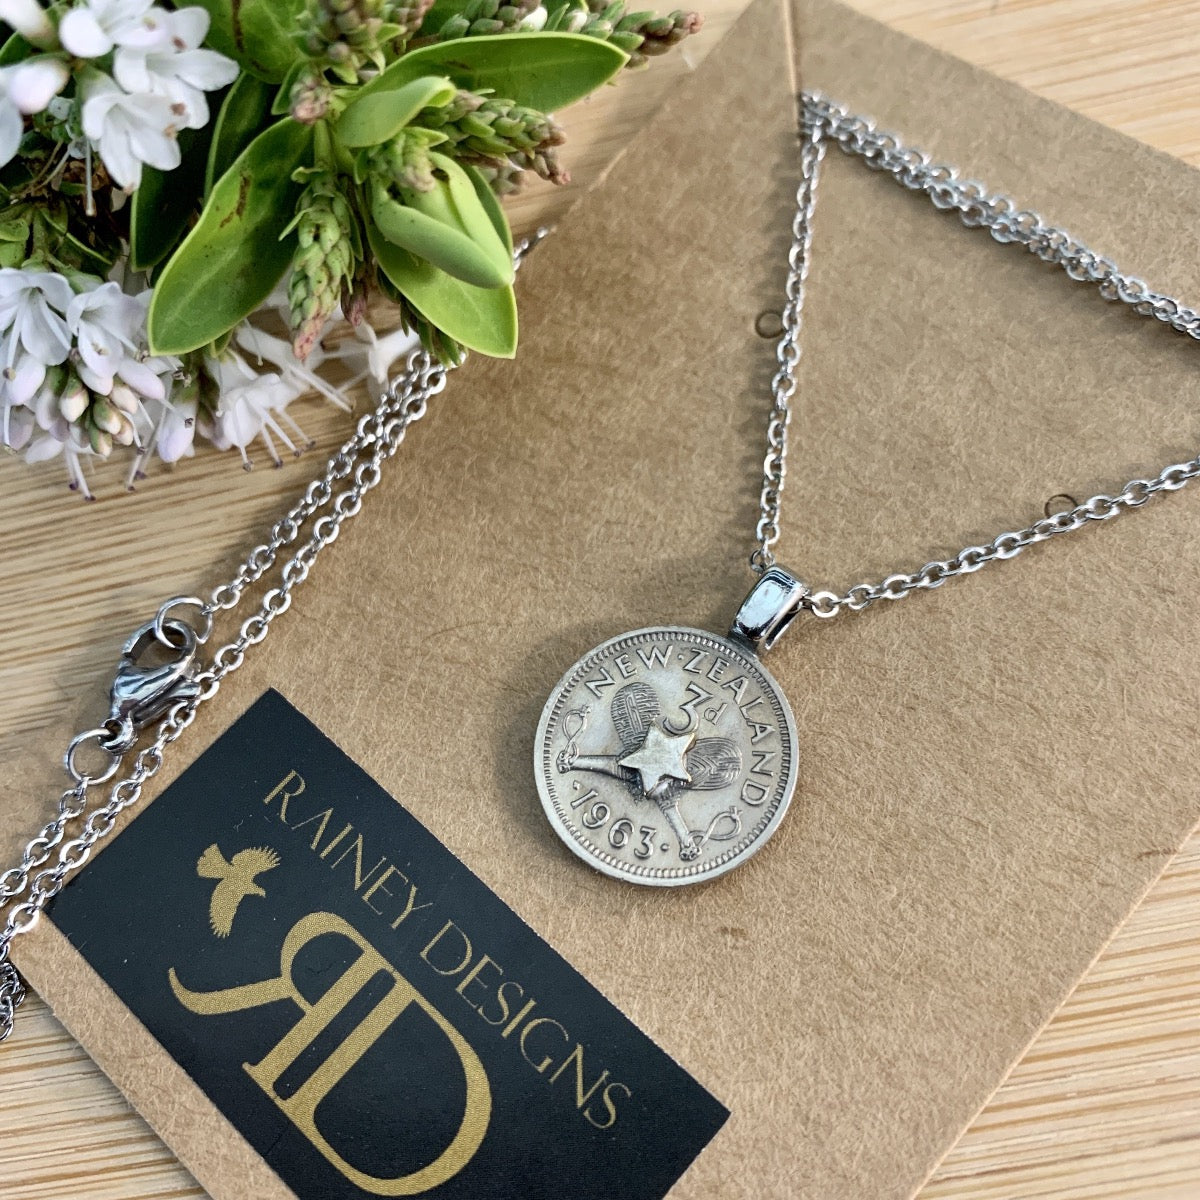 Petite Threepence Coin Necklace